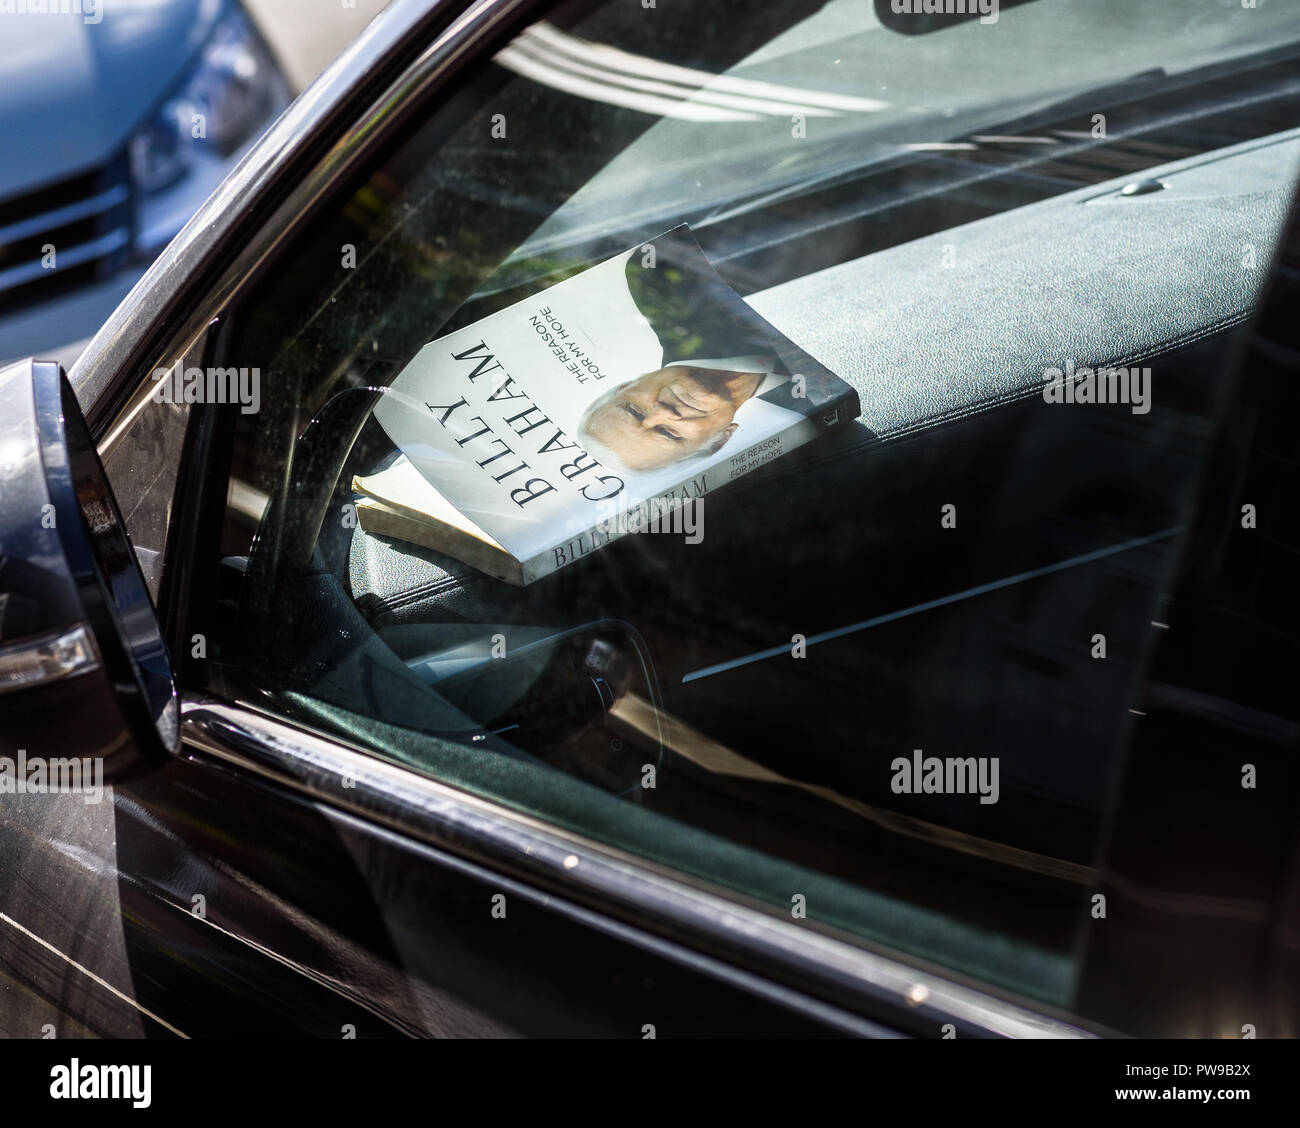 The Billy Graham Book 'The Reason For My Hope' left in the dash of a car. Stock Photo